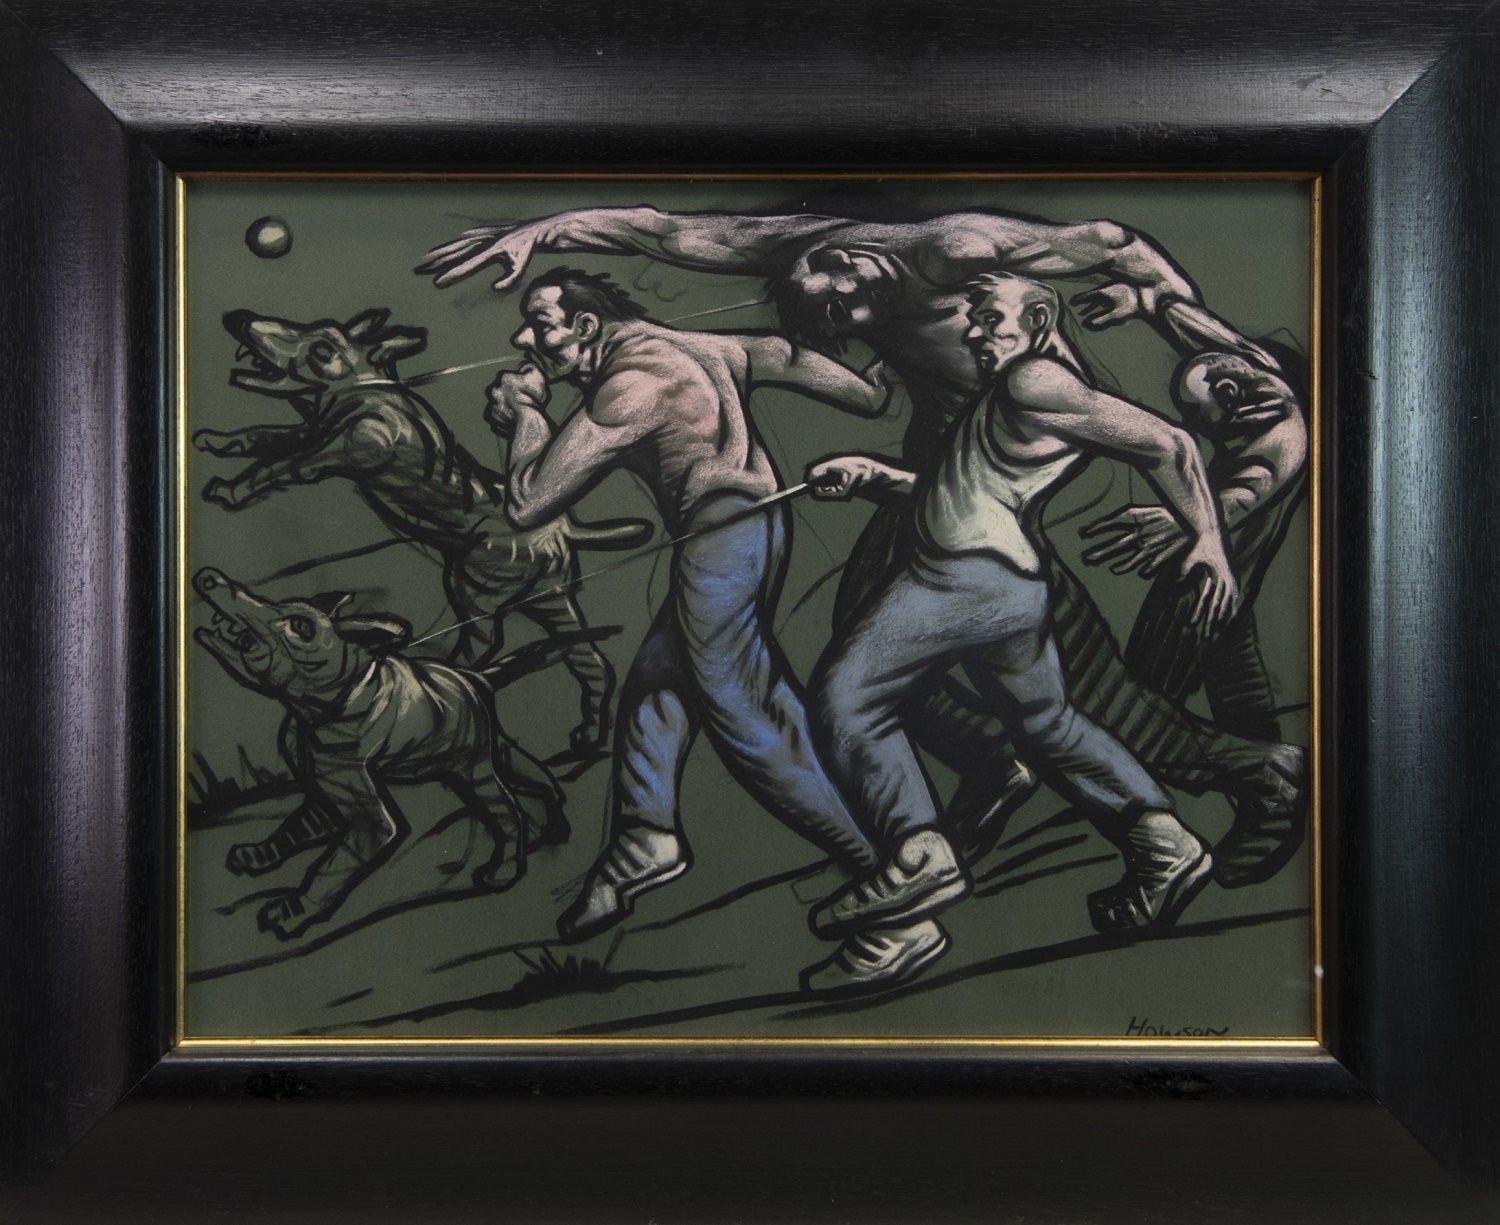 BAND OF BROTHERS, A PASTEL BY PETER HOWSON